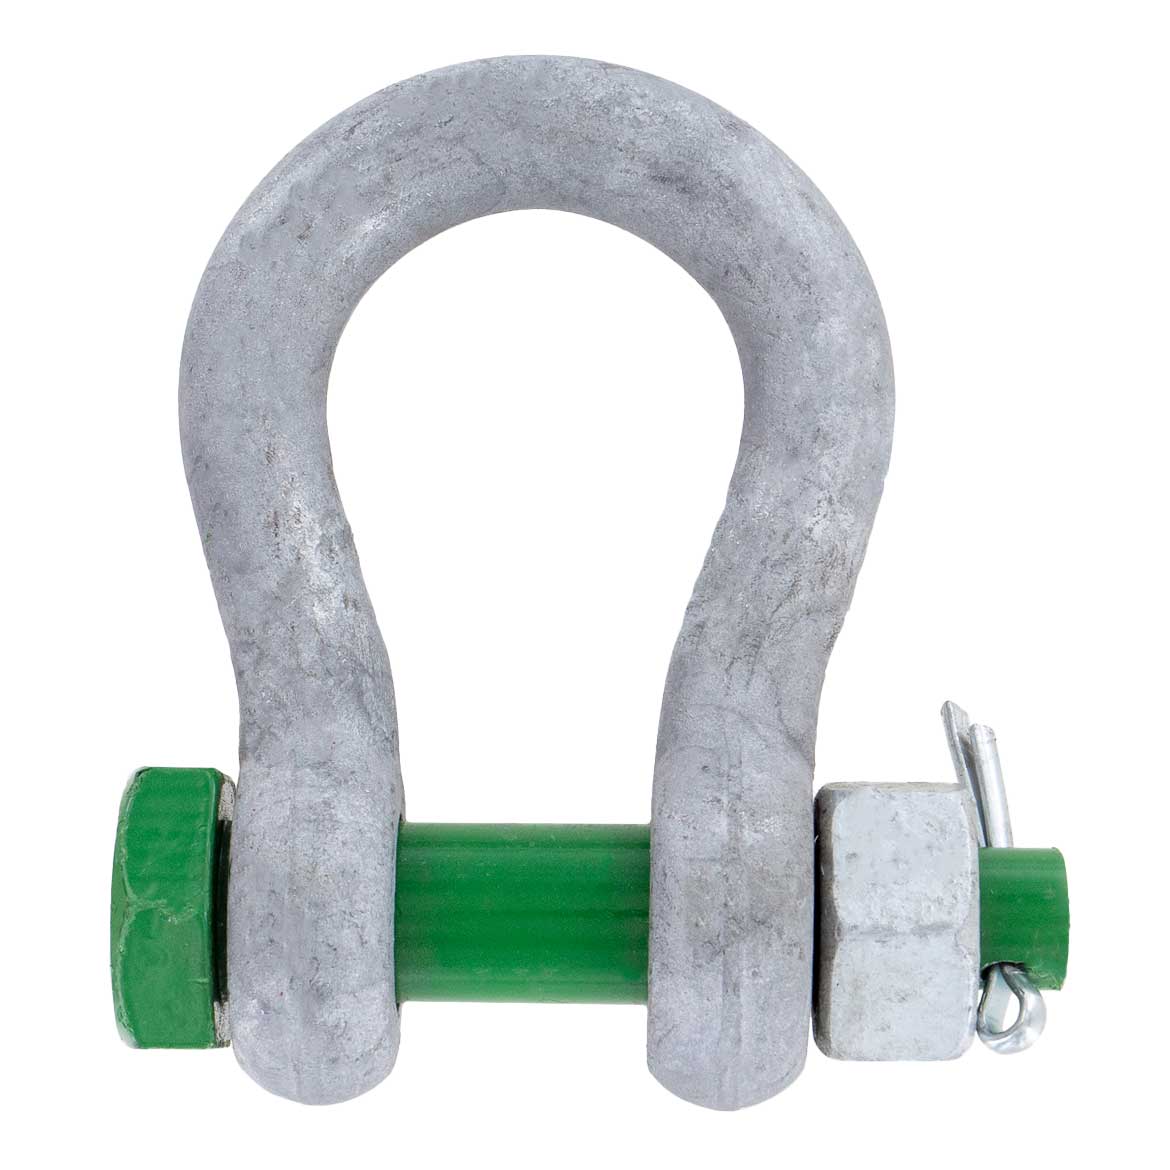 1-1/2" Van Beest Green Pin® Bolt Type Anchor Shackle | G-4163 - 17 Ton primary image